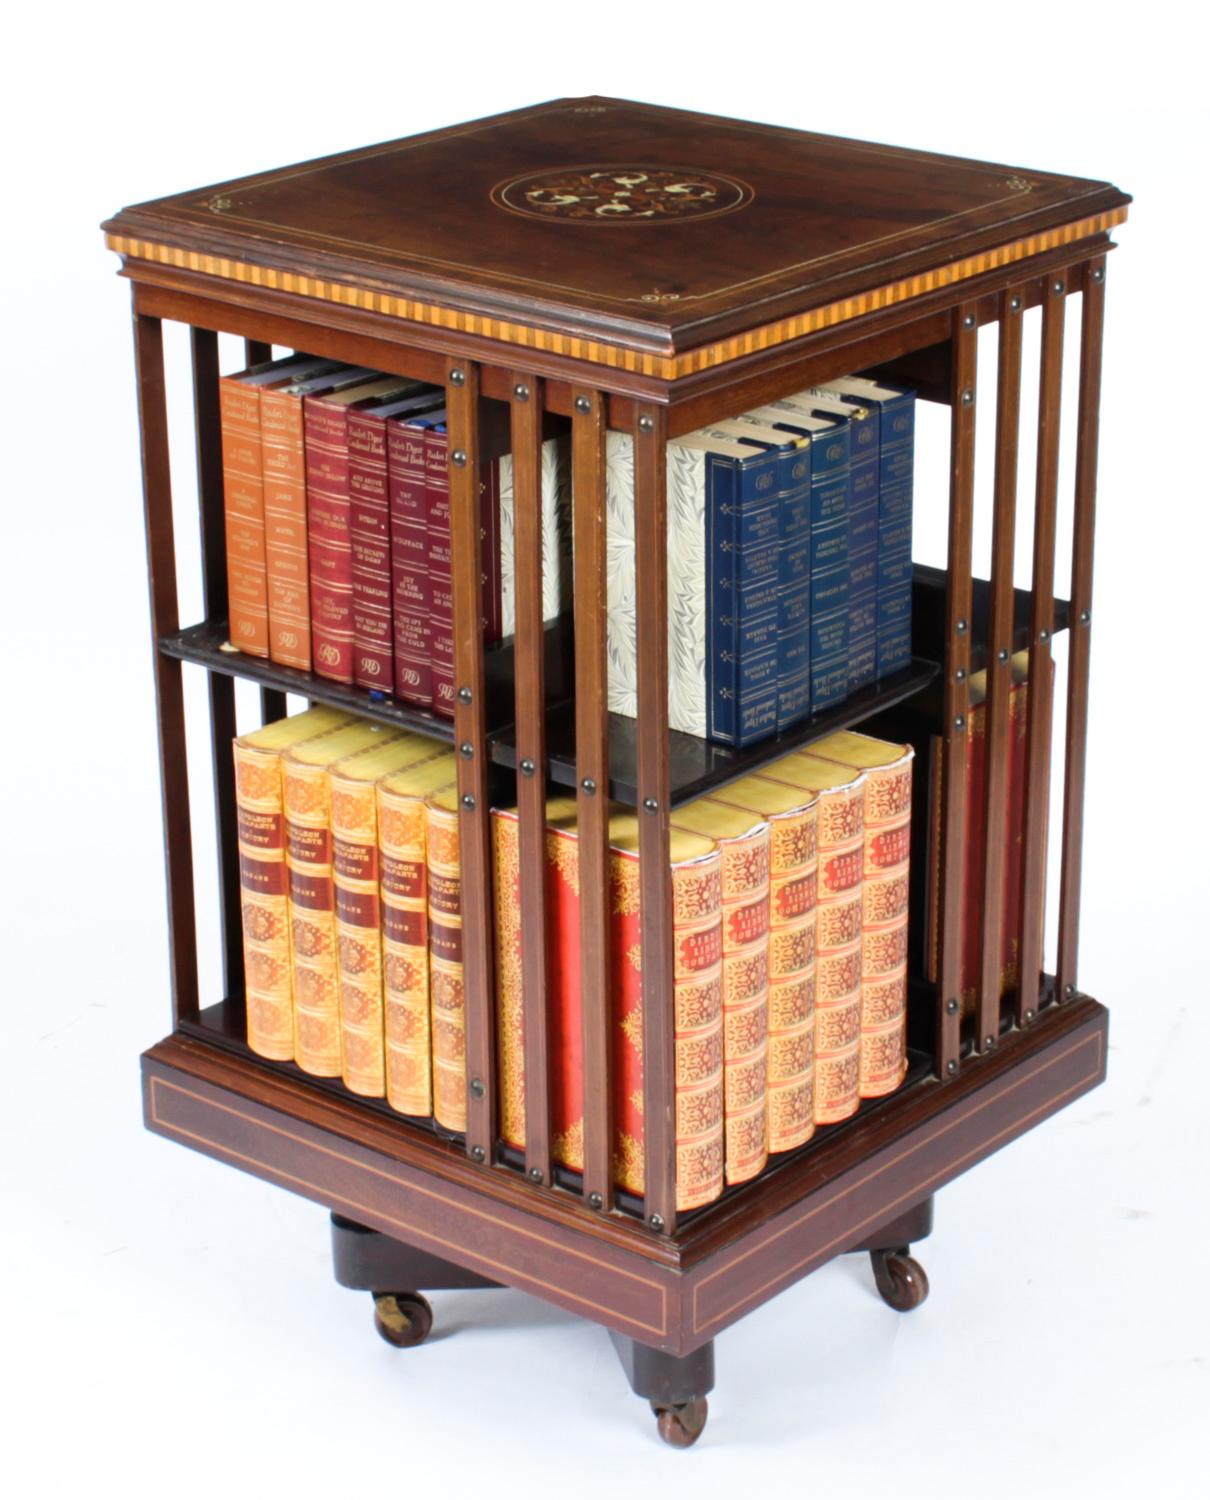 This an exquisite antique Victorian revolving bookcase, circa 1880 in date.

It is made of mahogany , revolves on a solid cast iron base, has inlaid boxwood lines to the top and bottom, the top with elaborate Renaissance Revival dolphin inlay to the